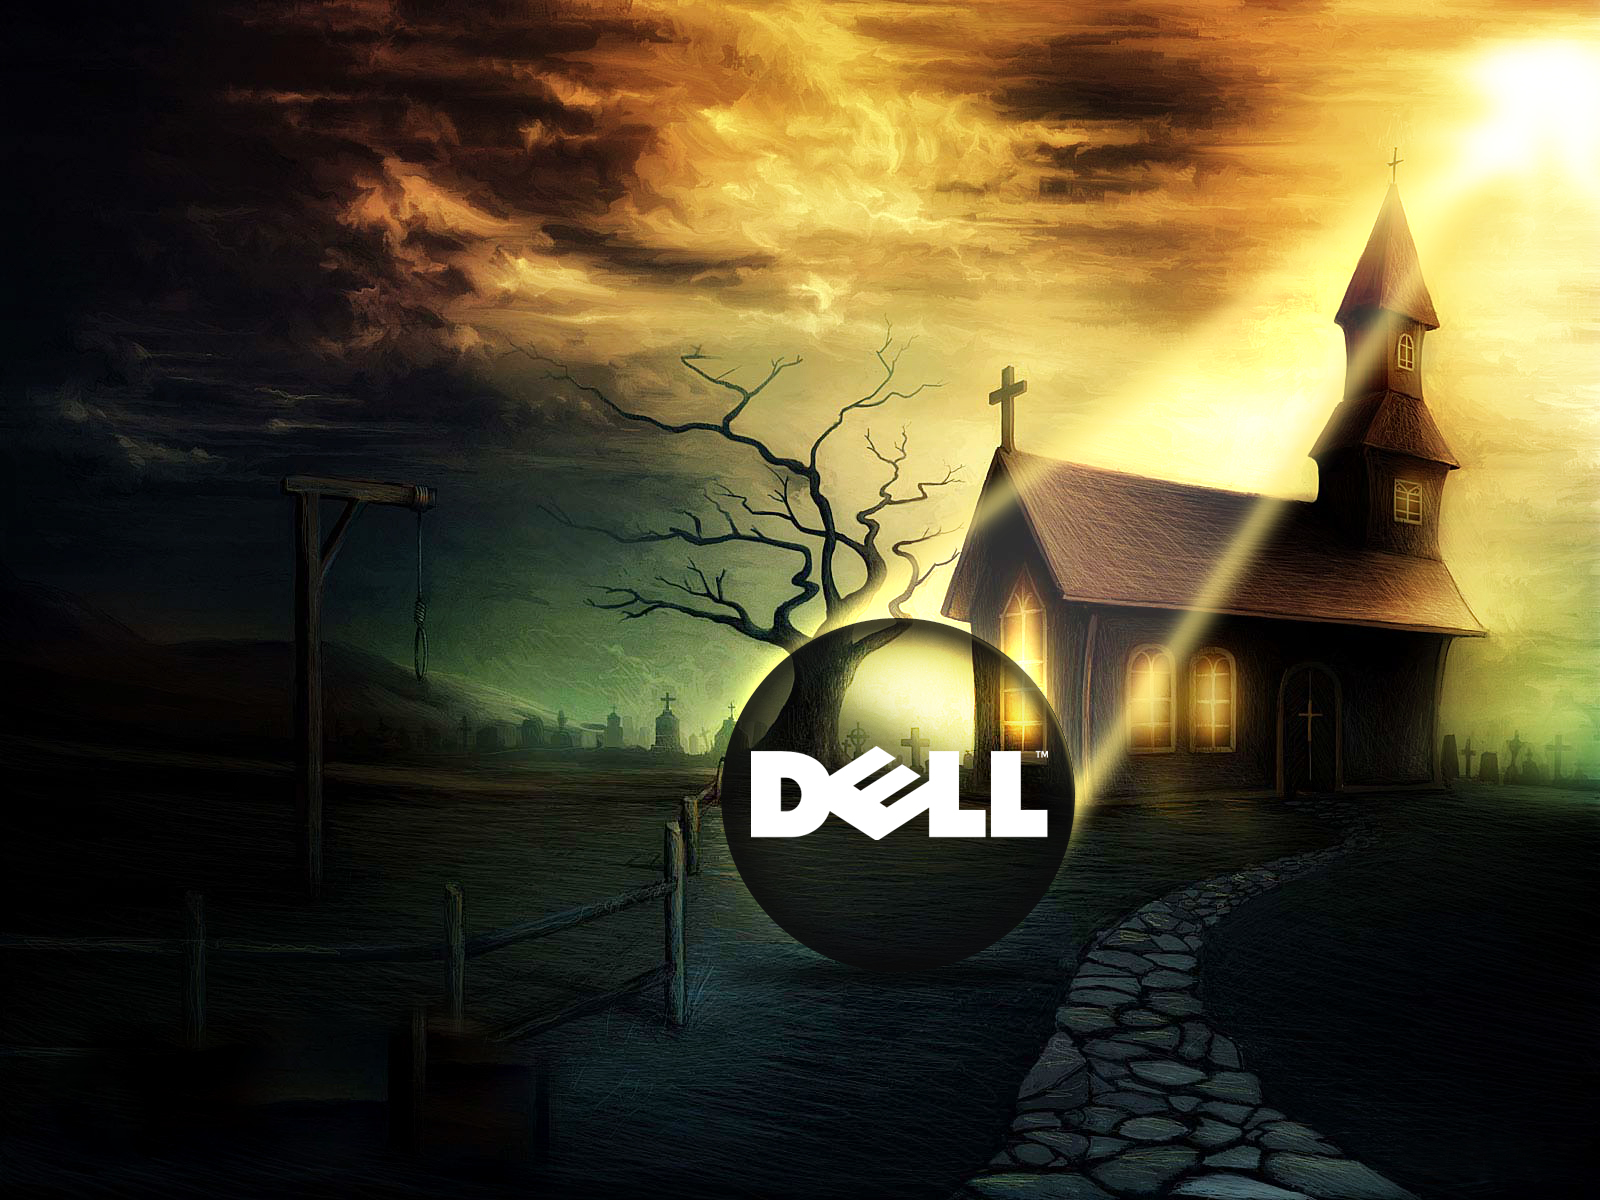 Dell Laptop Wallpapers, HD Dell 1366x768 Backgrounds, Free Images Download